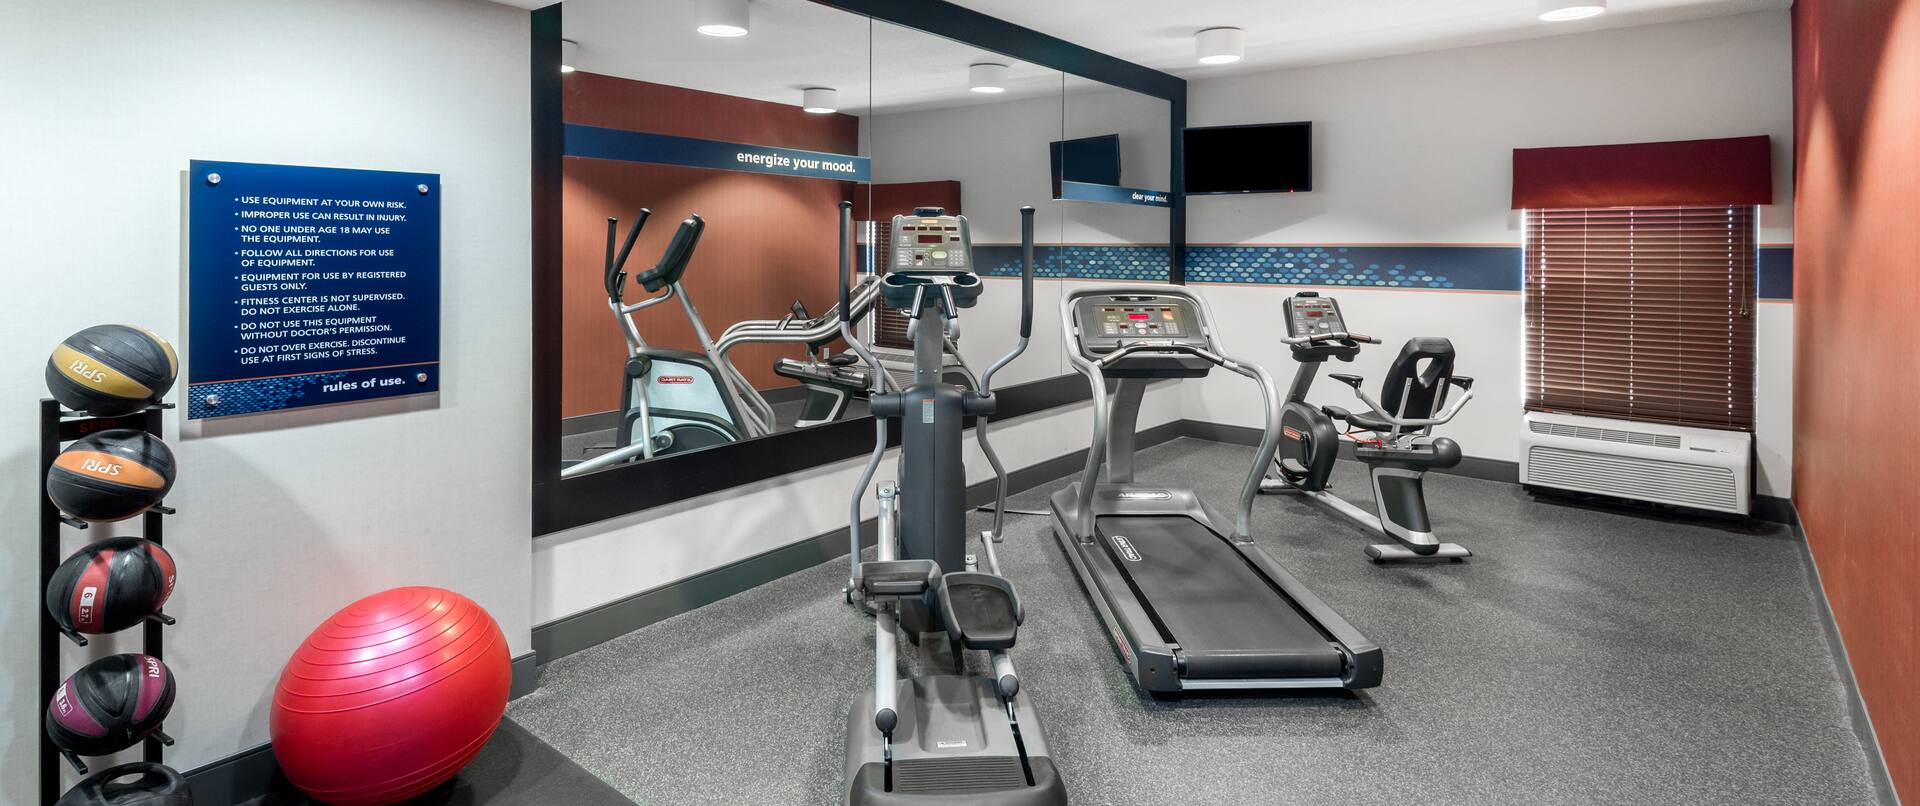 Fitness Center with Exercise Balls and Treadmill and Other Equipment